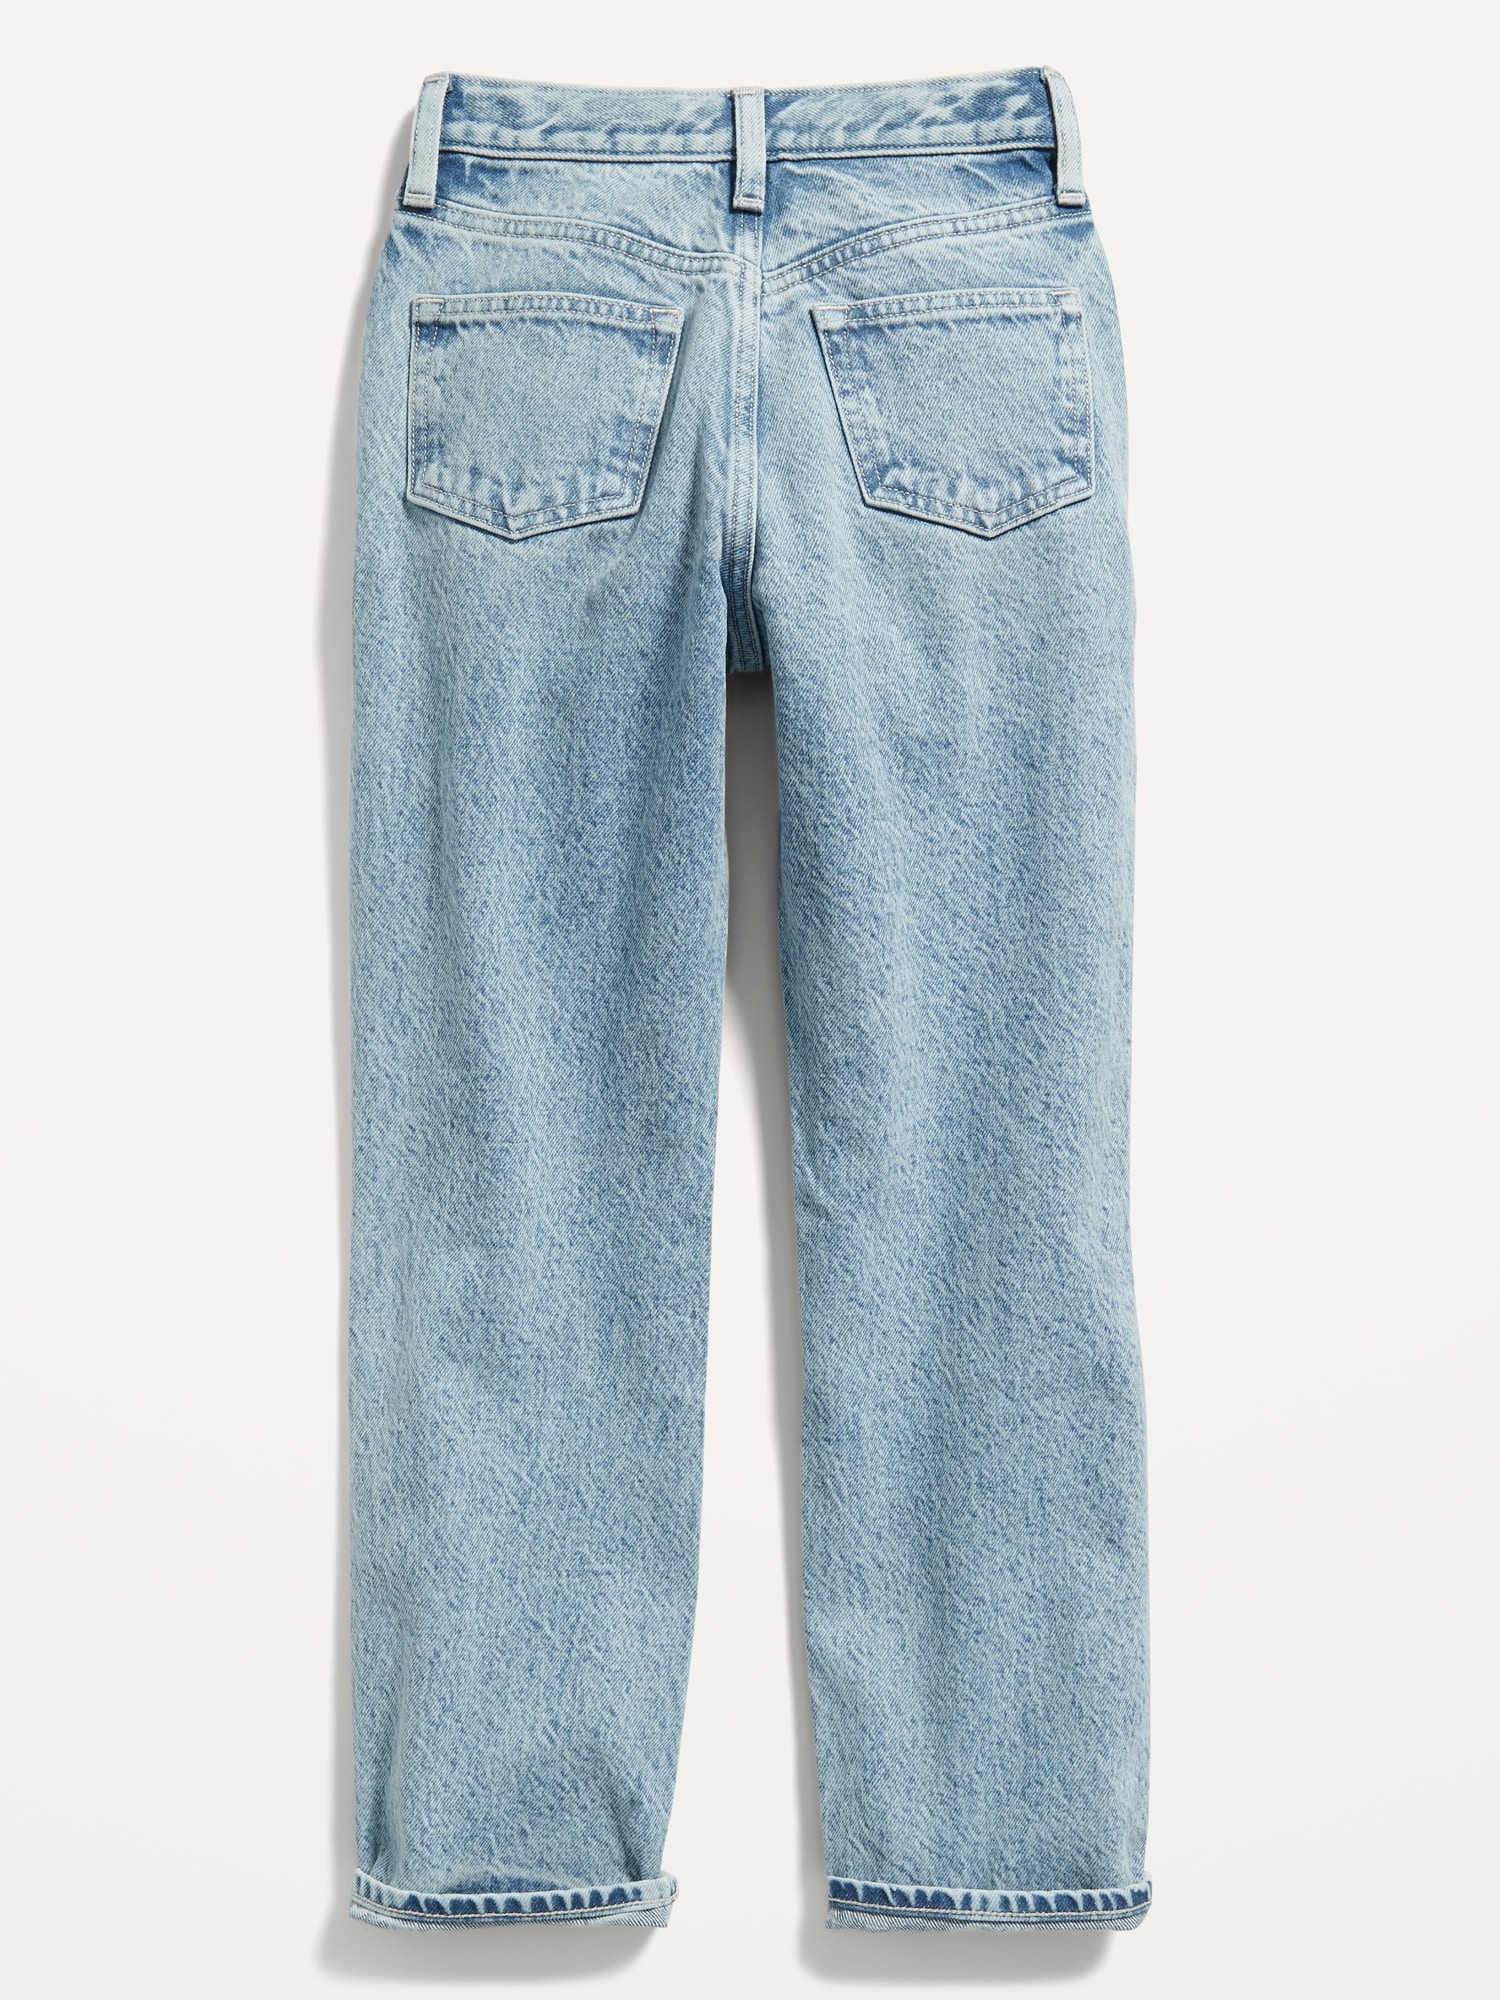 High-Waisted Slouchy Straight Light-Wash Ripped Jeans for Girls | Old Navy